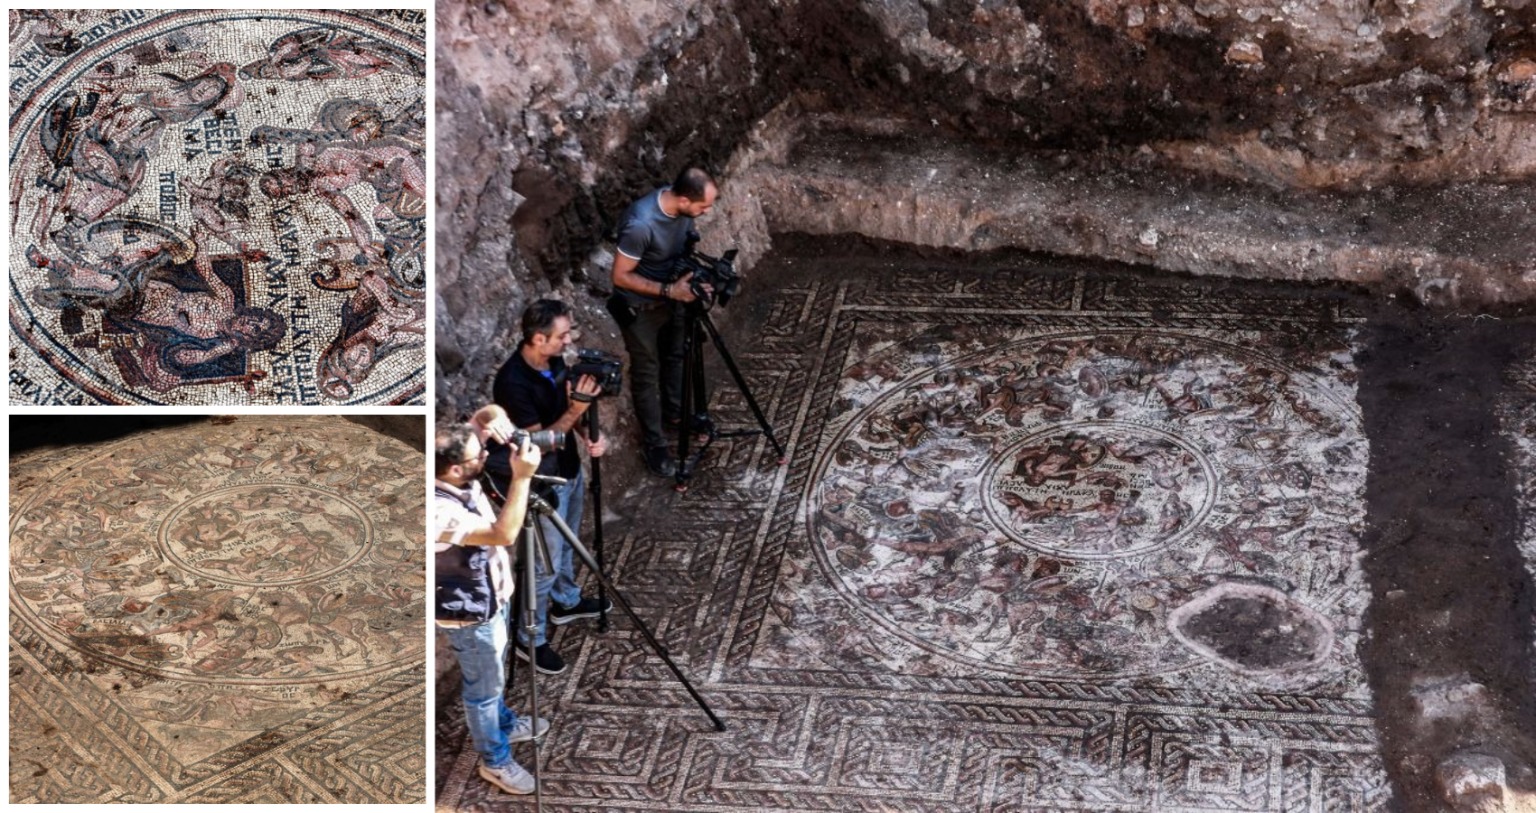 Archaeologists Have Found an Ancient Roman Mosaic in Syria That Miraculously Survived Rampant Looting and a Civil War